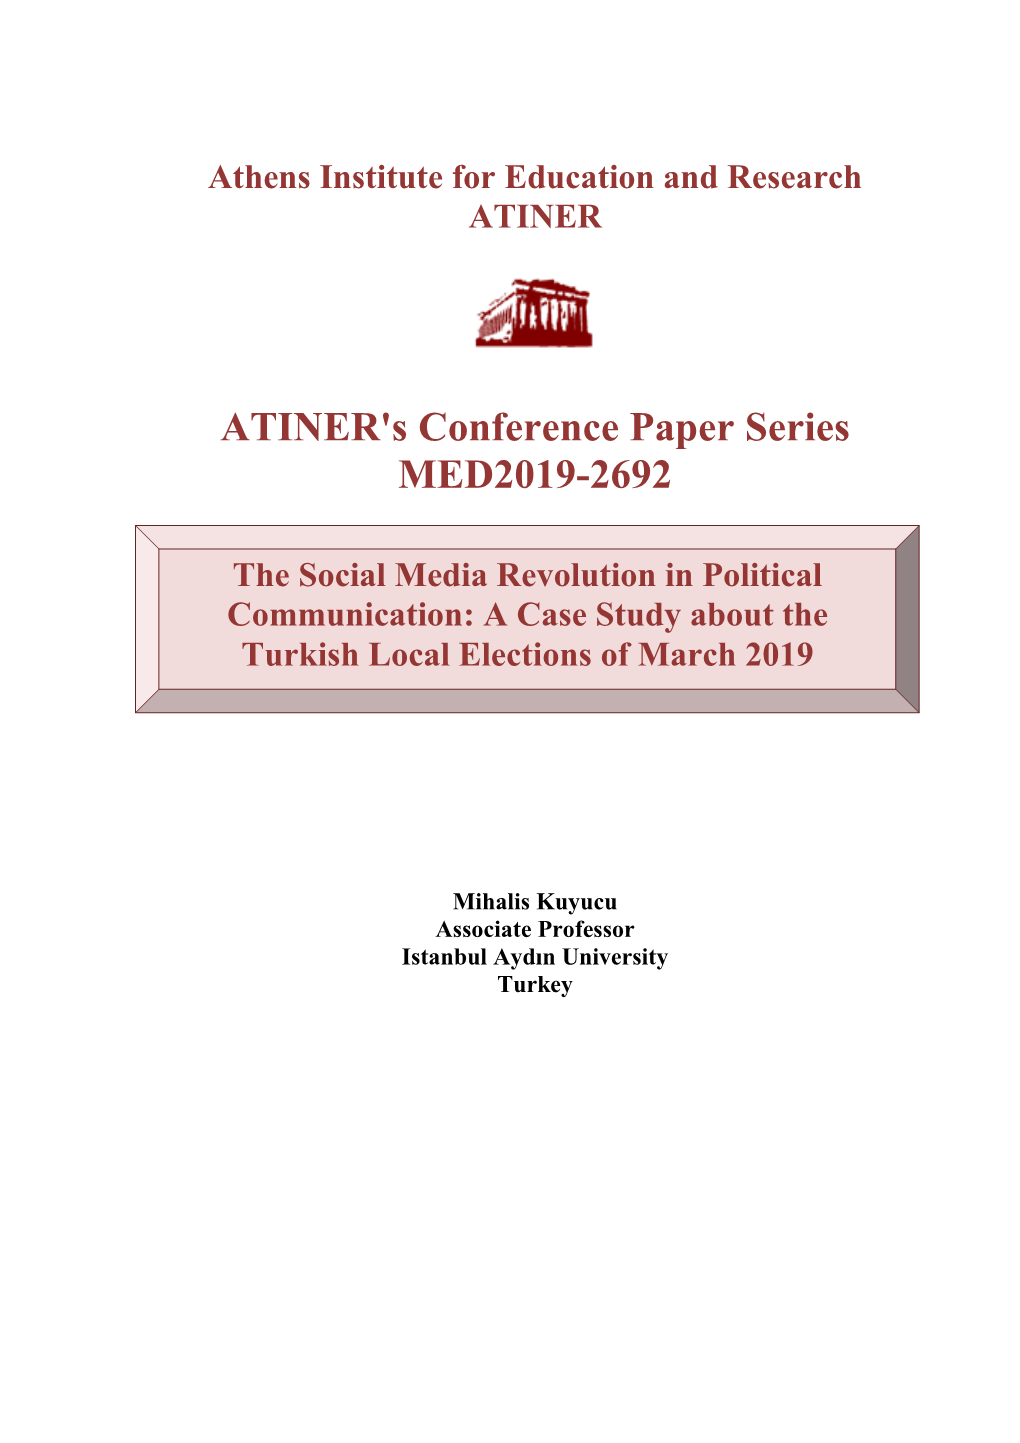 ATINER's Conference Paper Series MED2019-2692